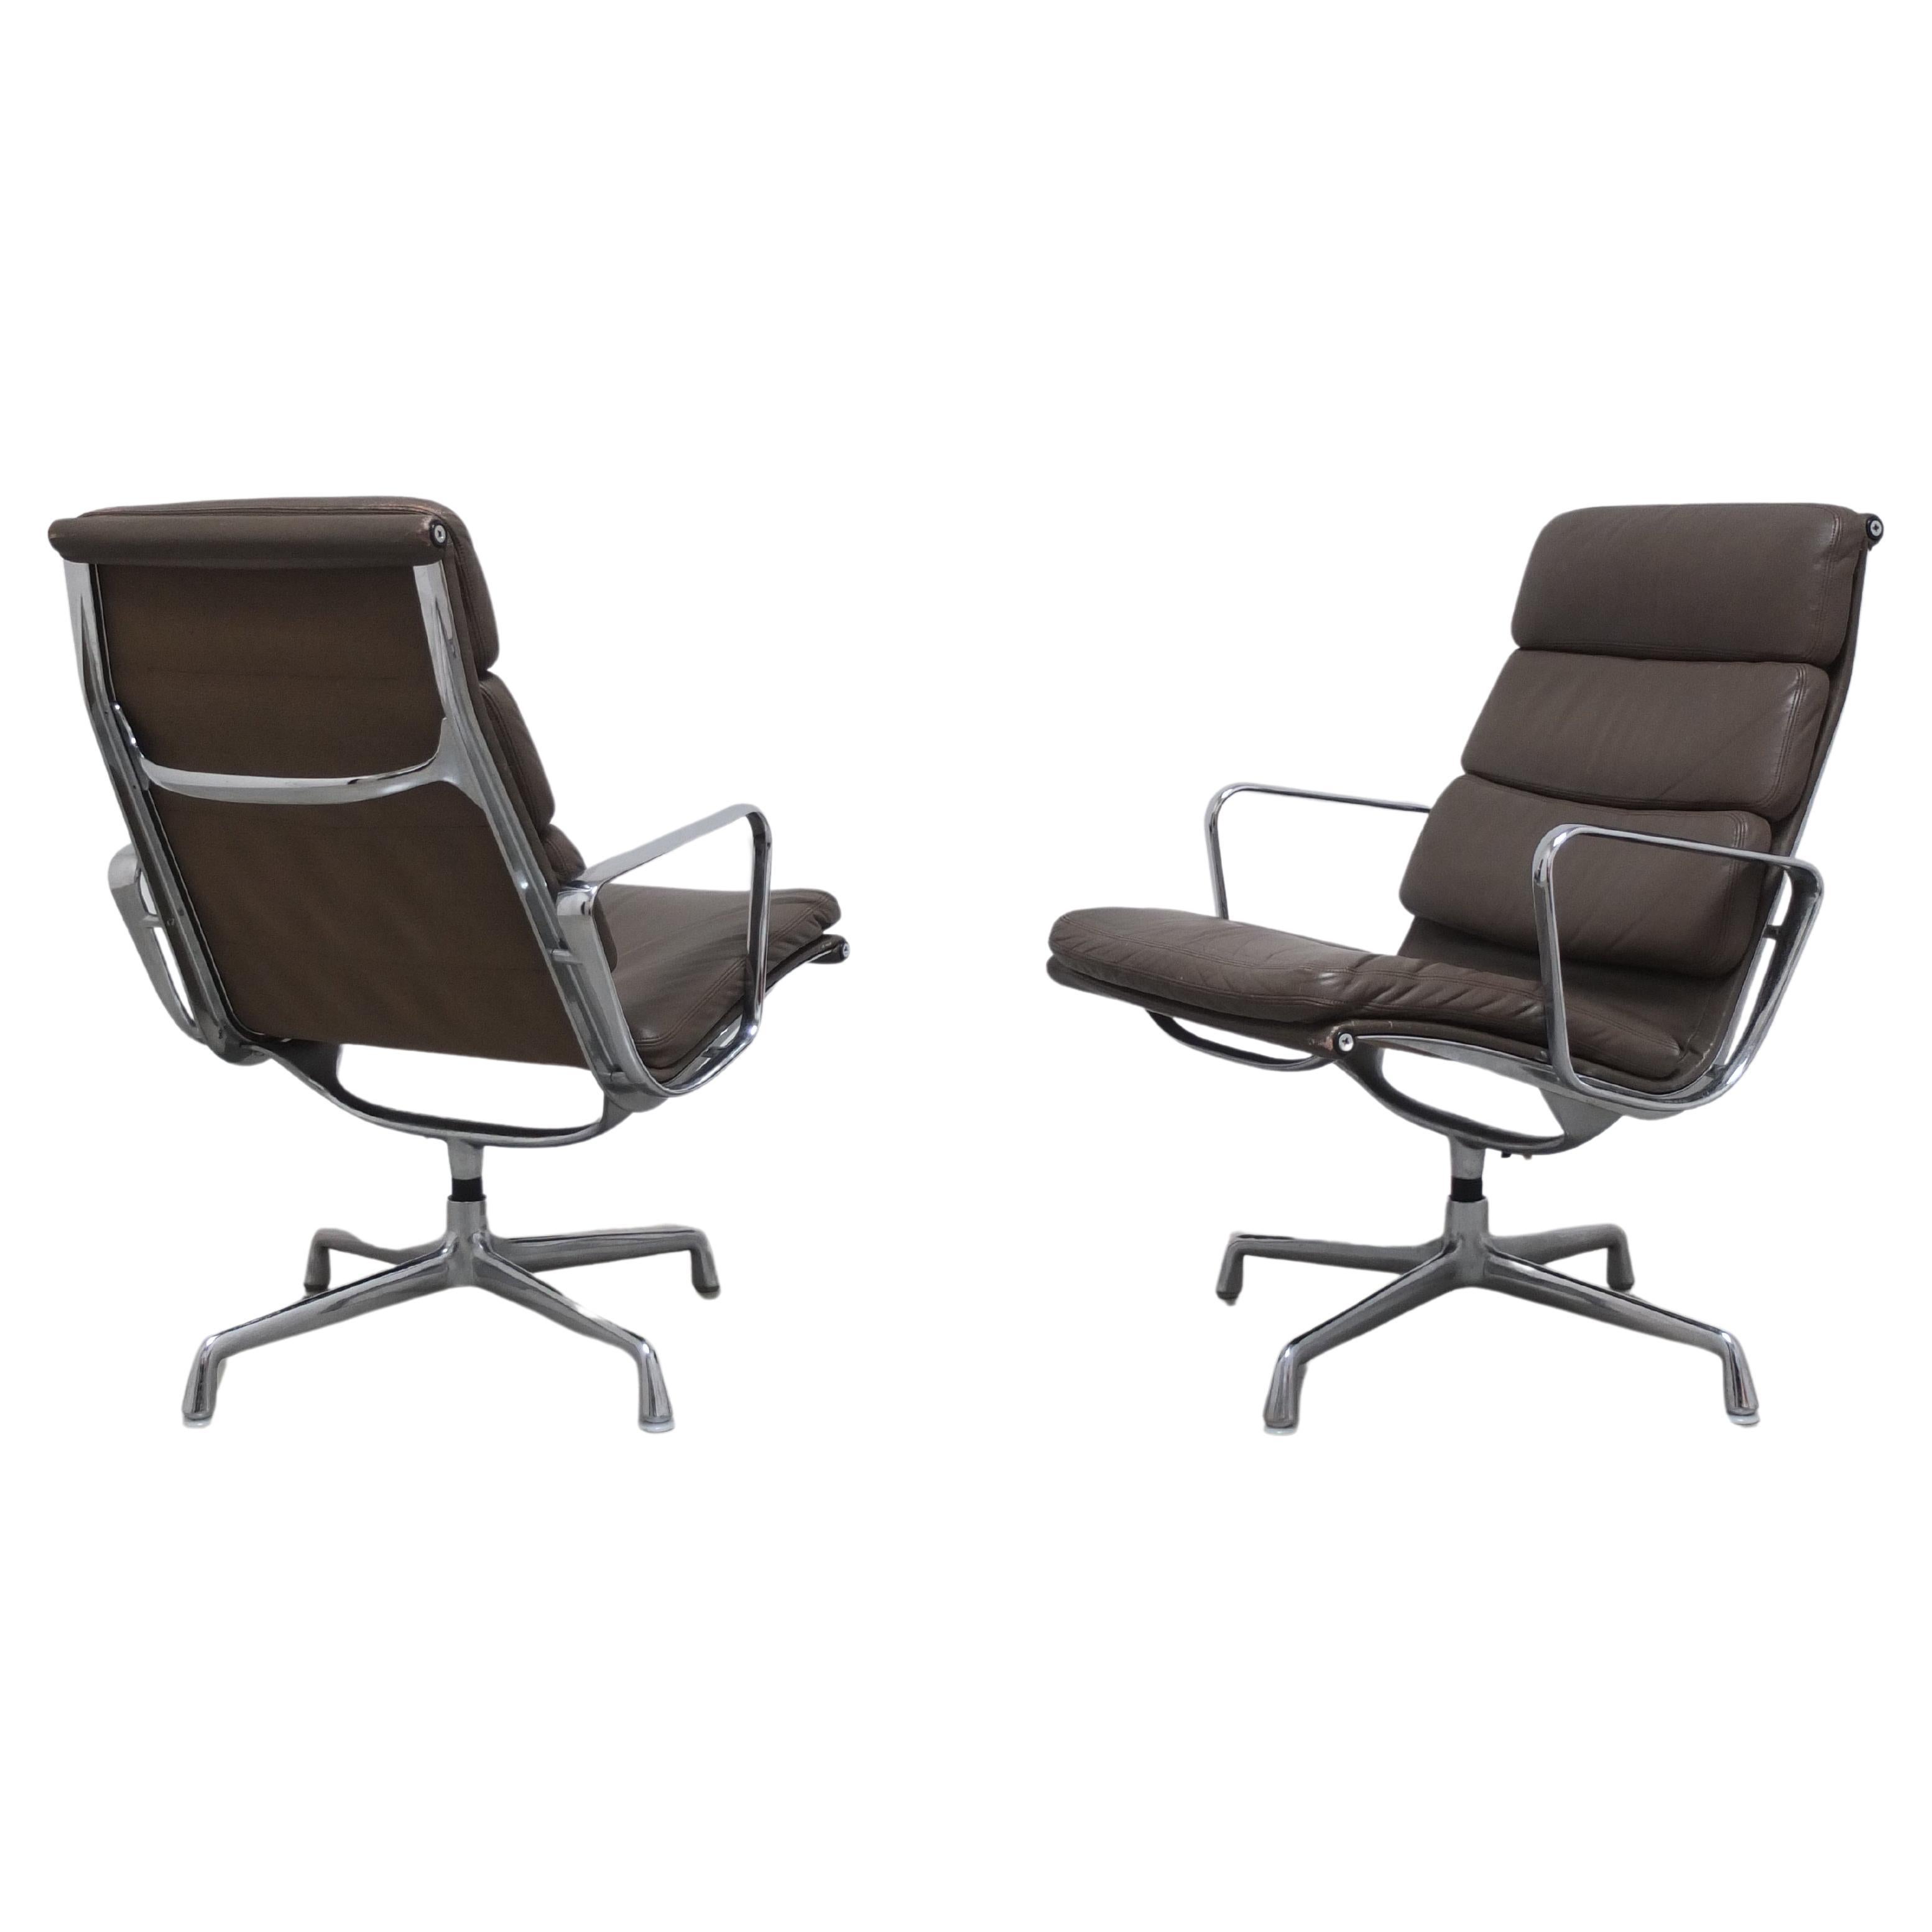 Early Pair of 'EA216' Chairs by Charles & Ray Eames for Herman Miller, 1970s For Sale